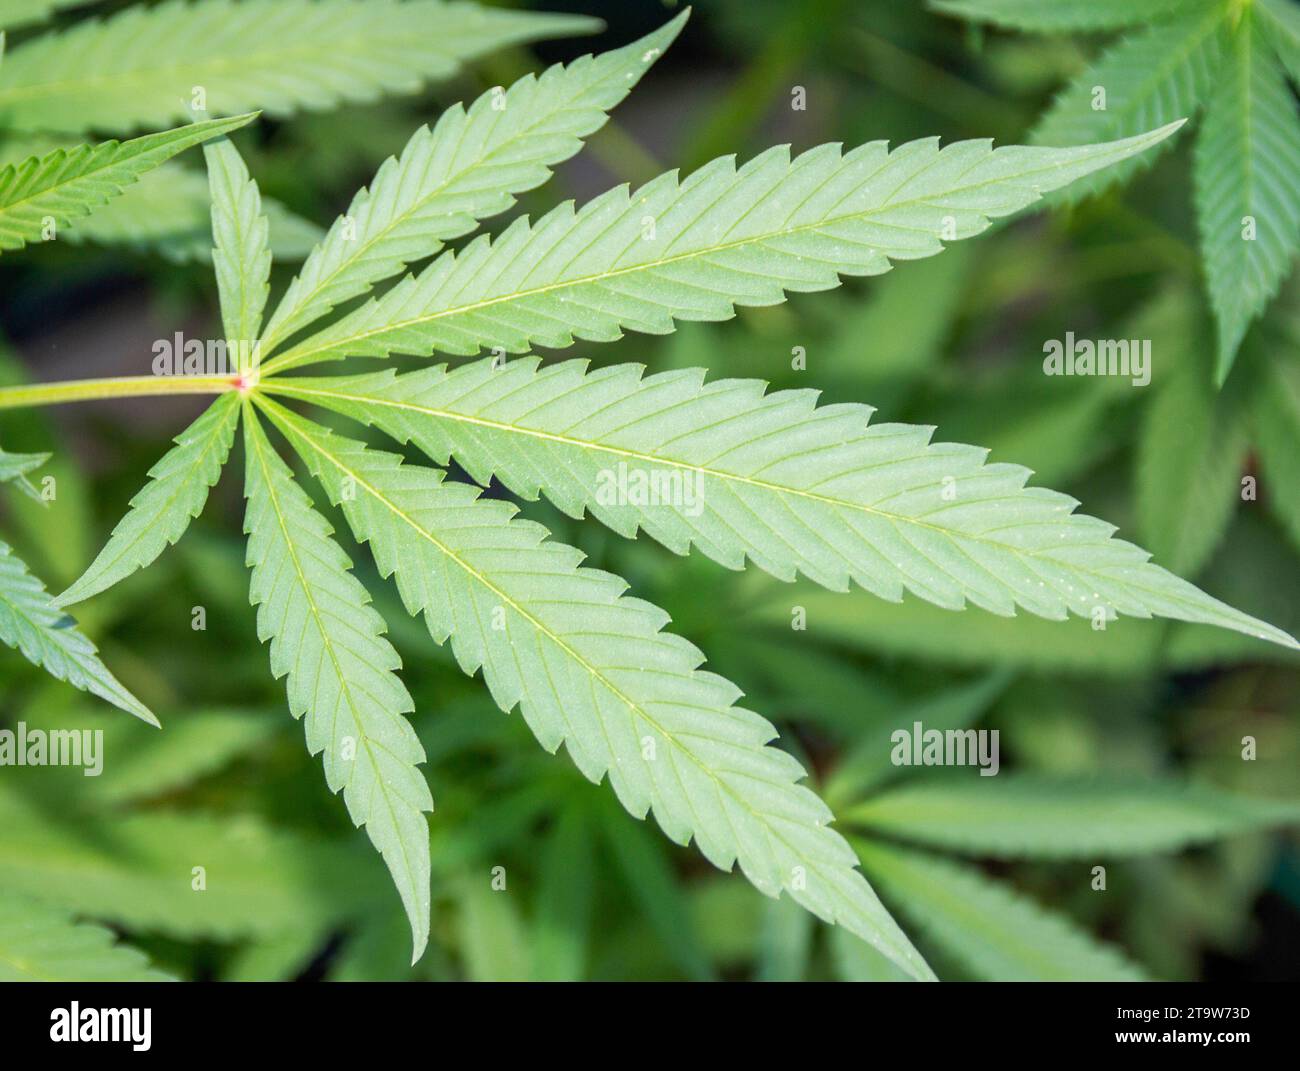 A close up of a green cannabis leaf on a plant. Stock Photo